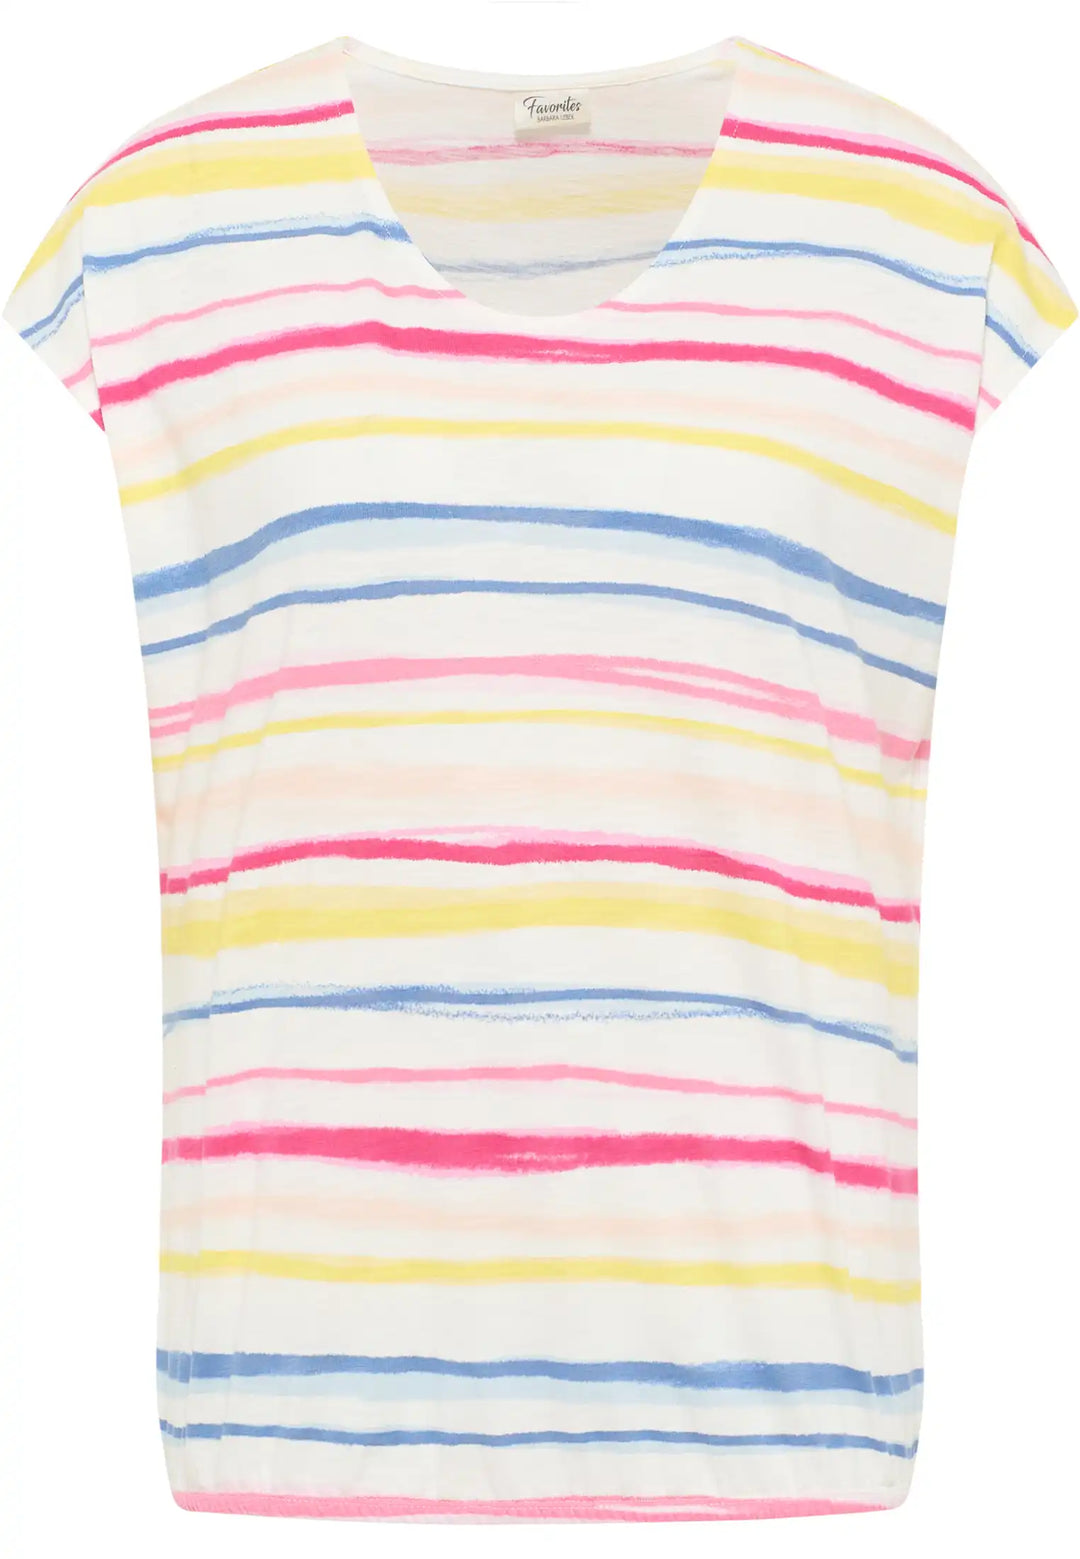 Light and airy multicolored pastel striped top with a scoop neckline and short sleeves, perfect for a relaxed summer day, style 57150042-530